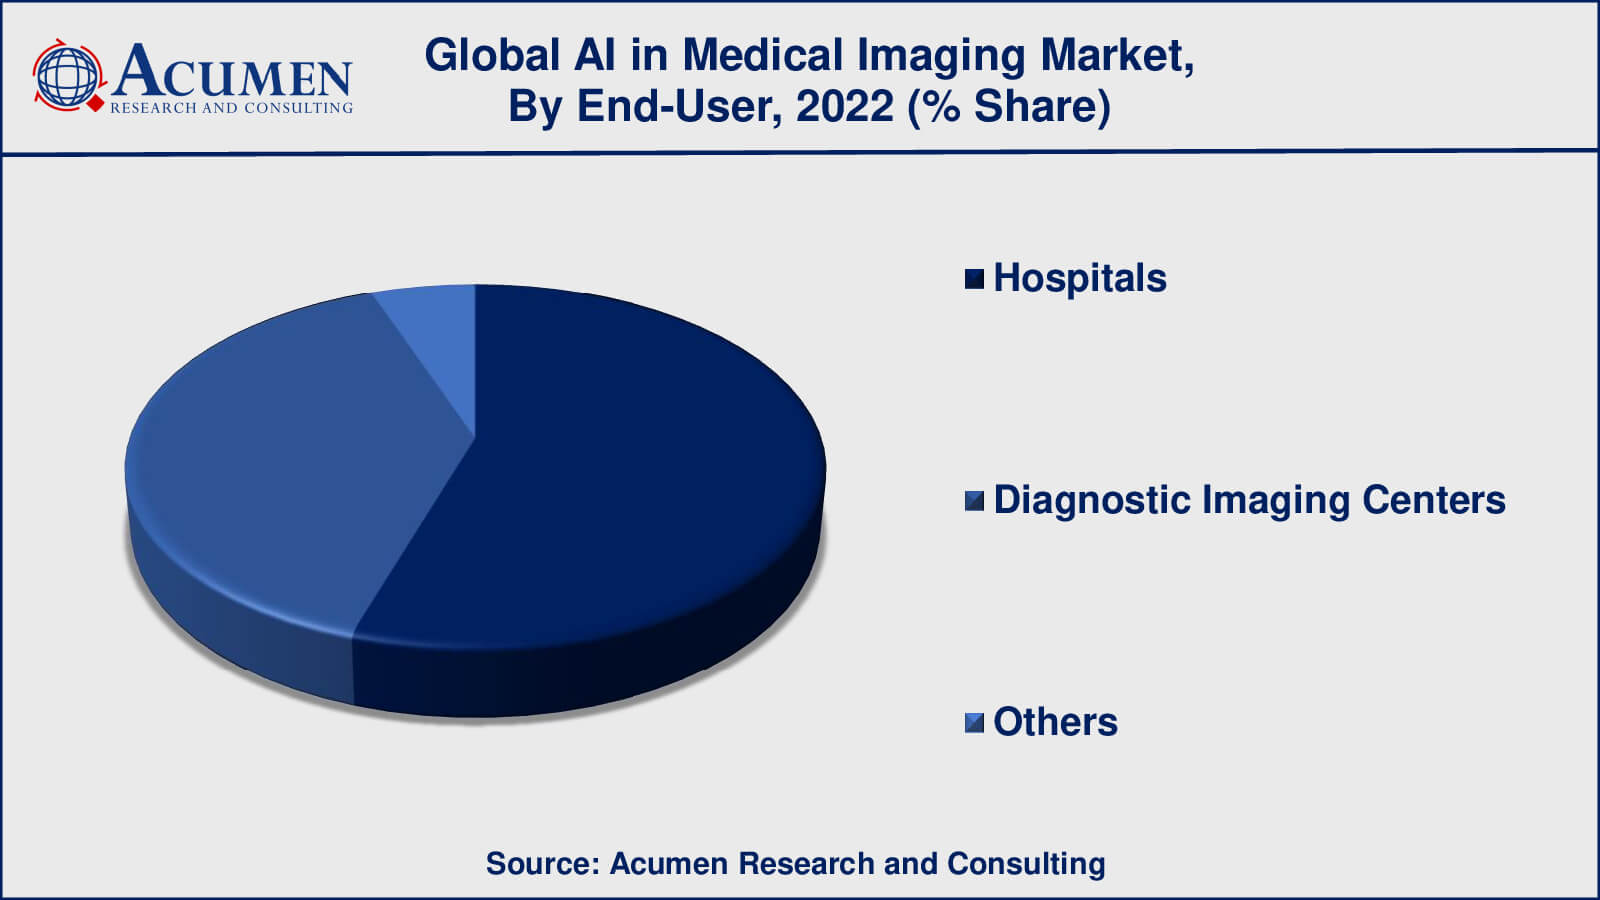 AI in Medical Imaging Market Drivers